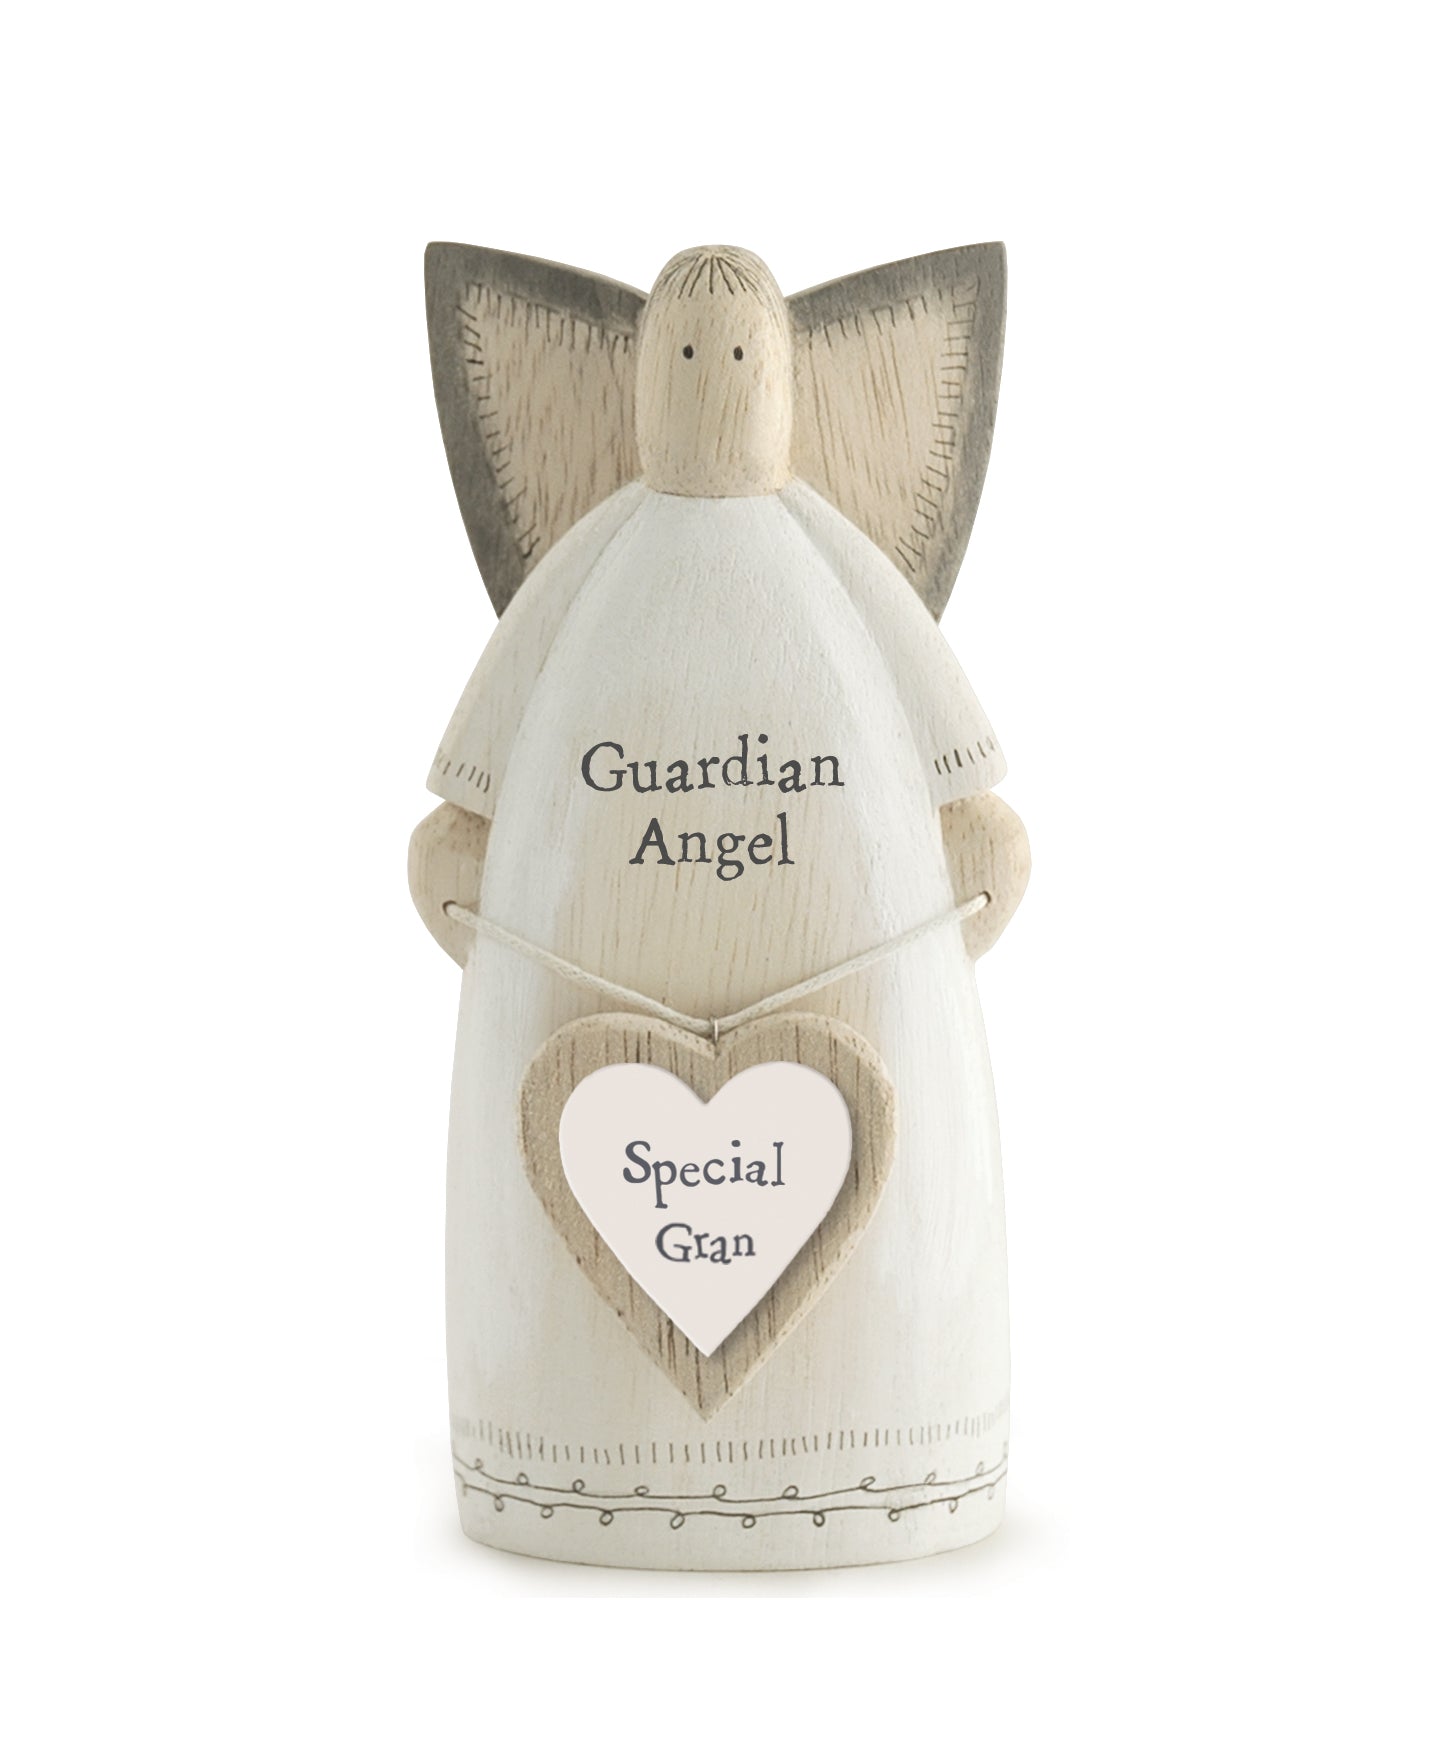 East Of India Special Gran Guardian Angel Wooden Ornament